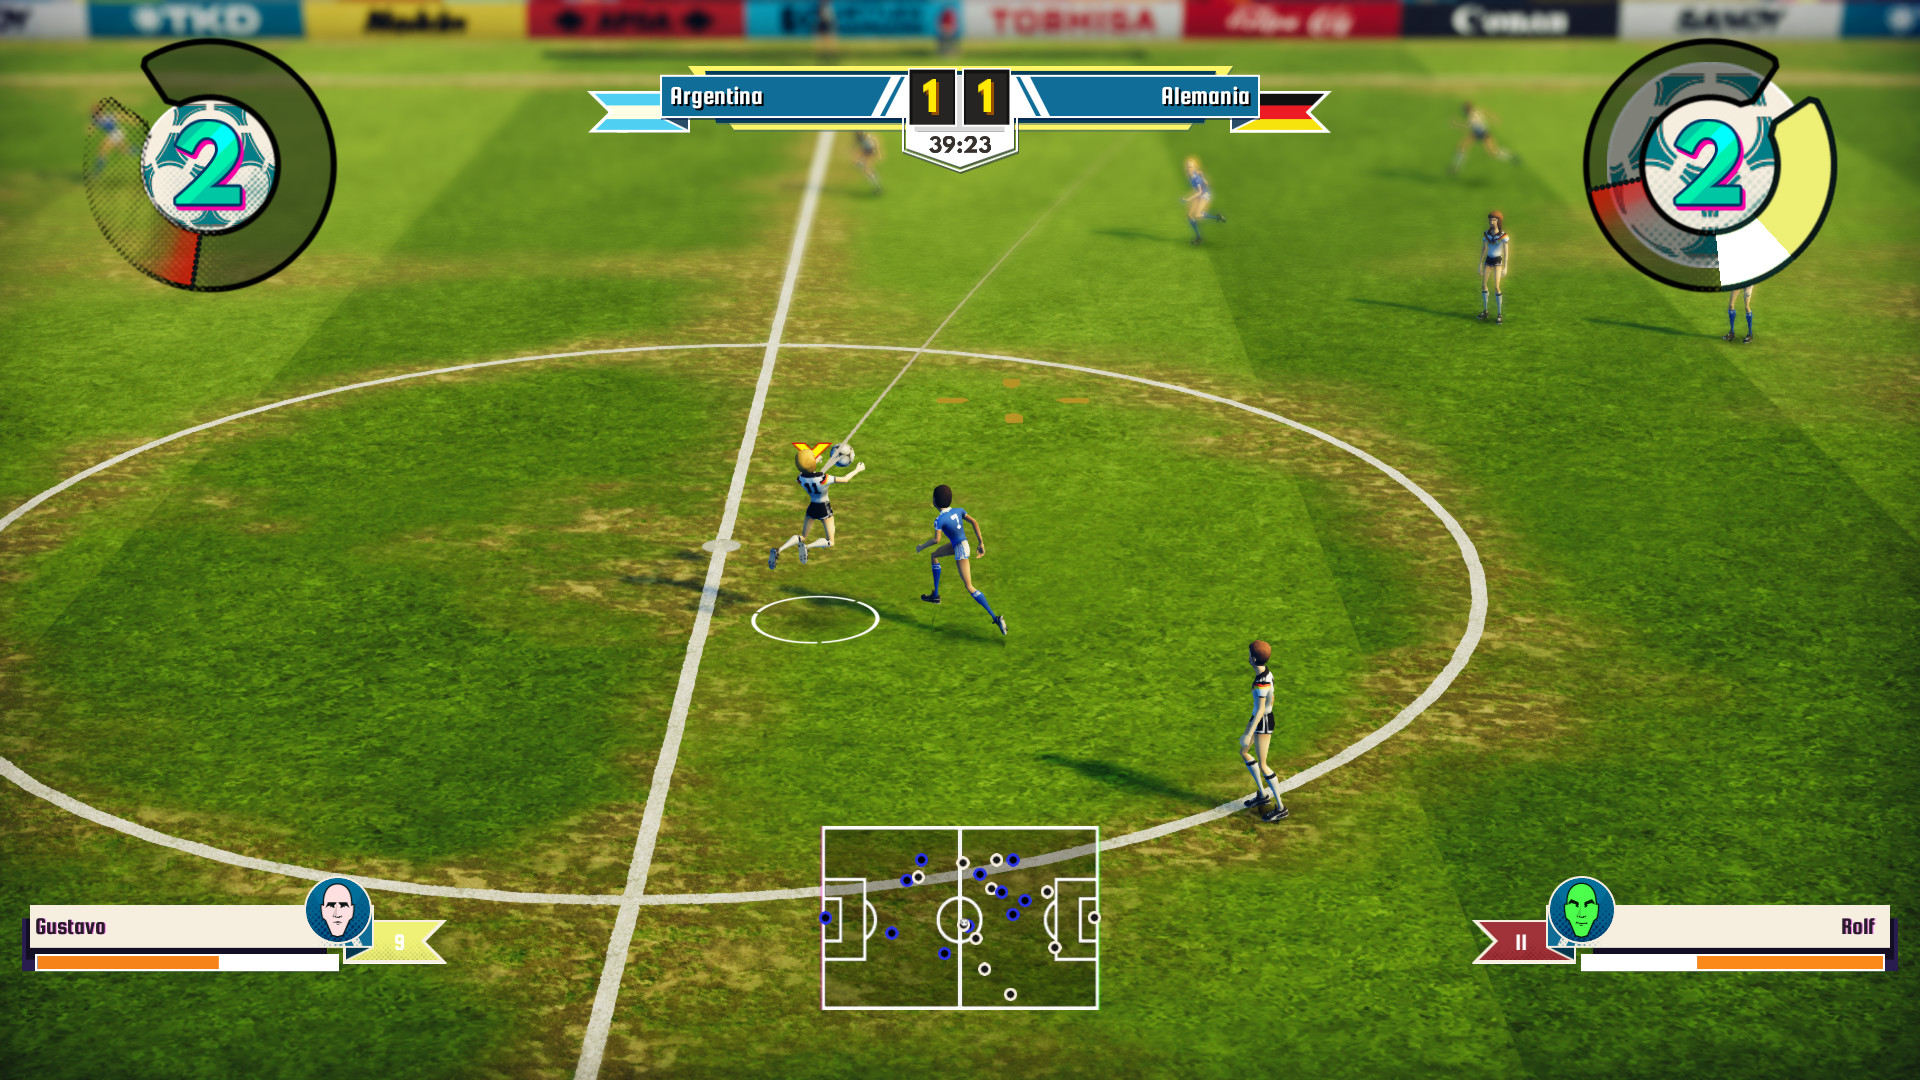 Legendary Eleven: Epic Football Free Download